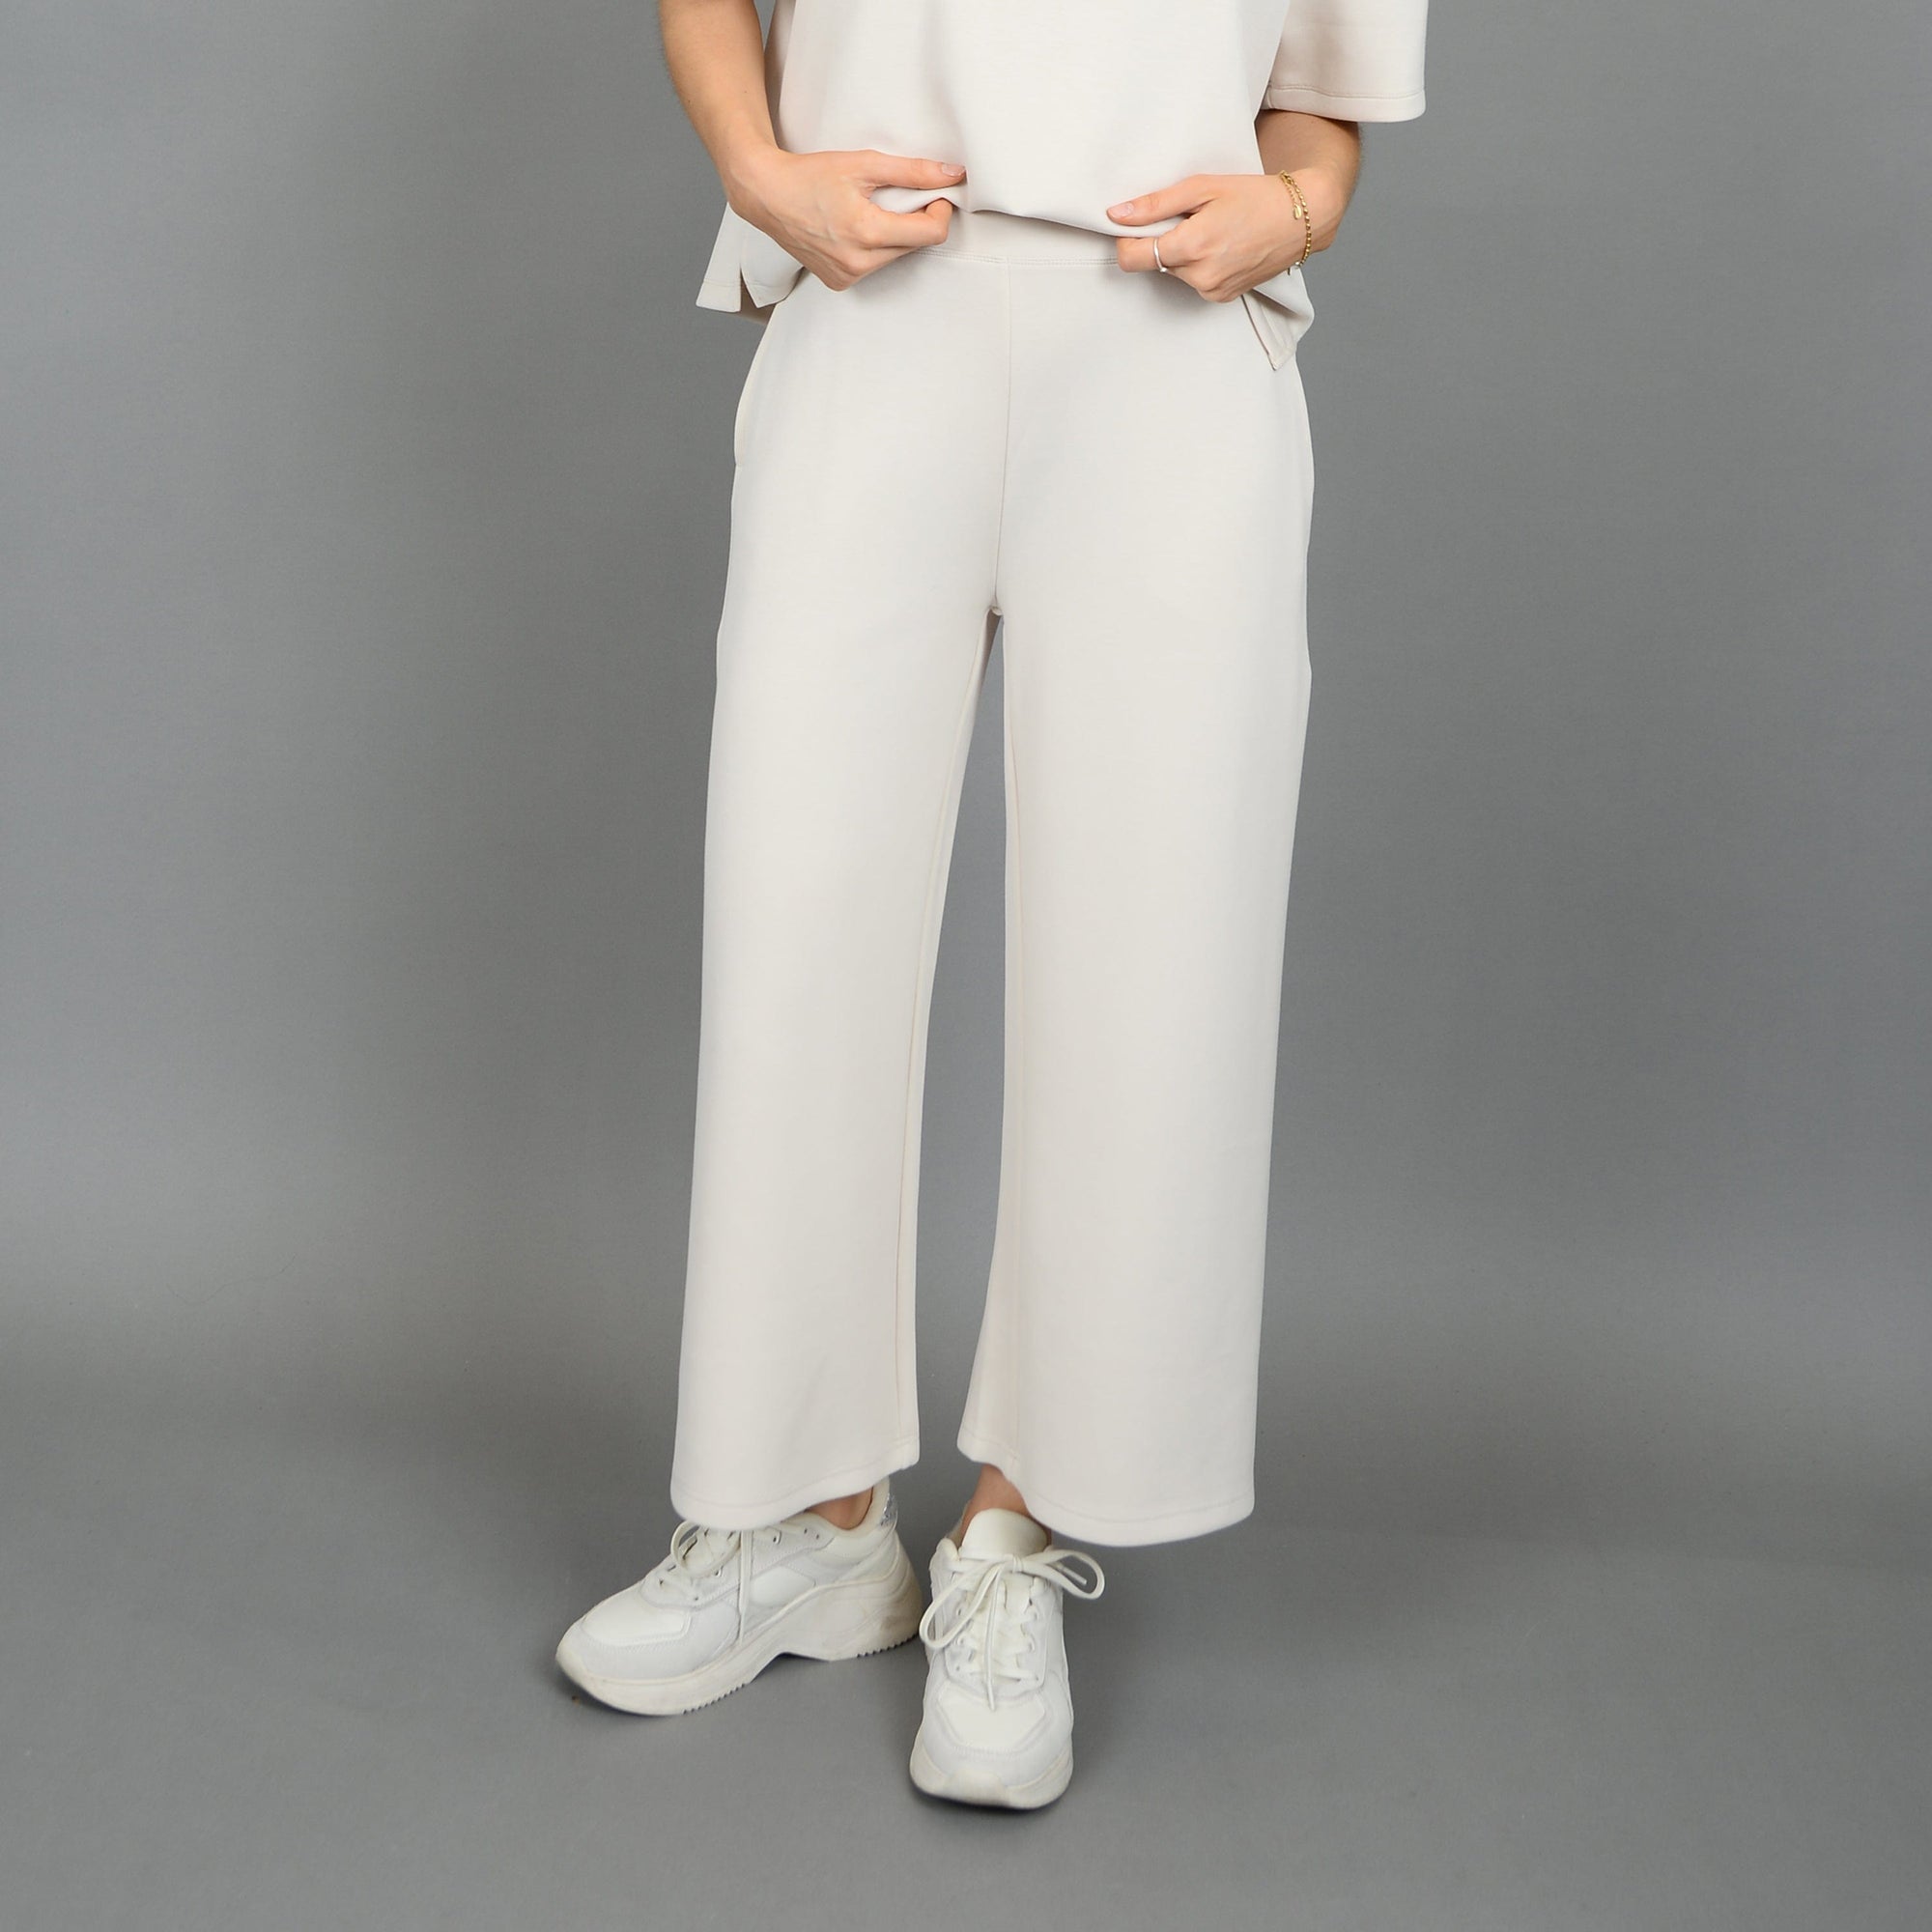 RD Second Skin Victoria Soft Knit Cropped Pants